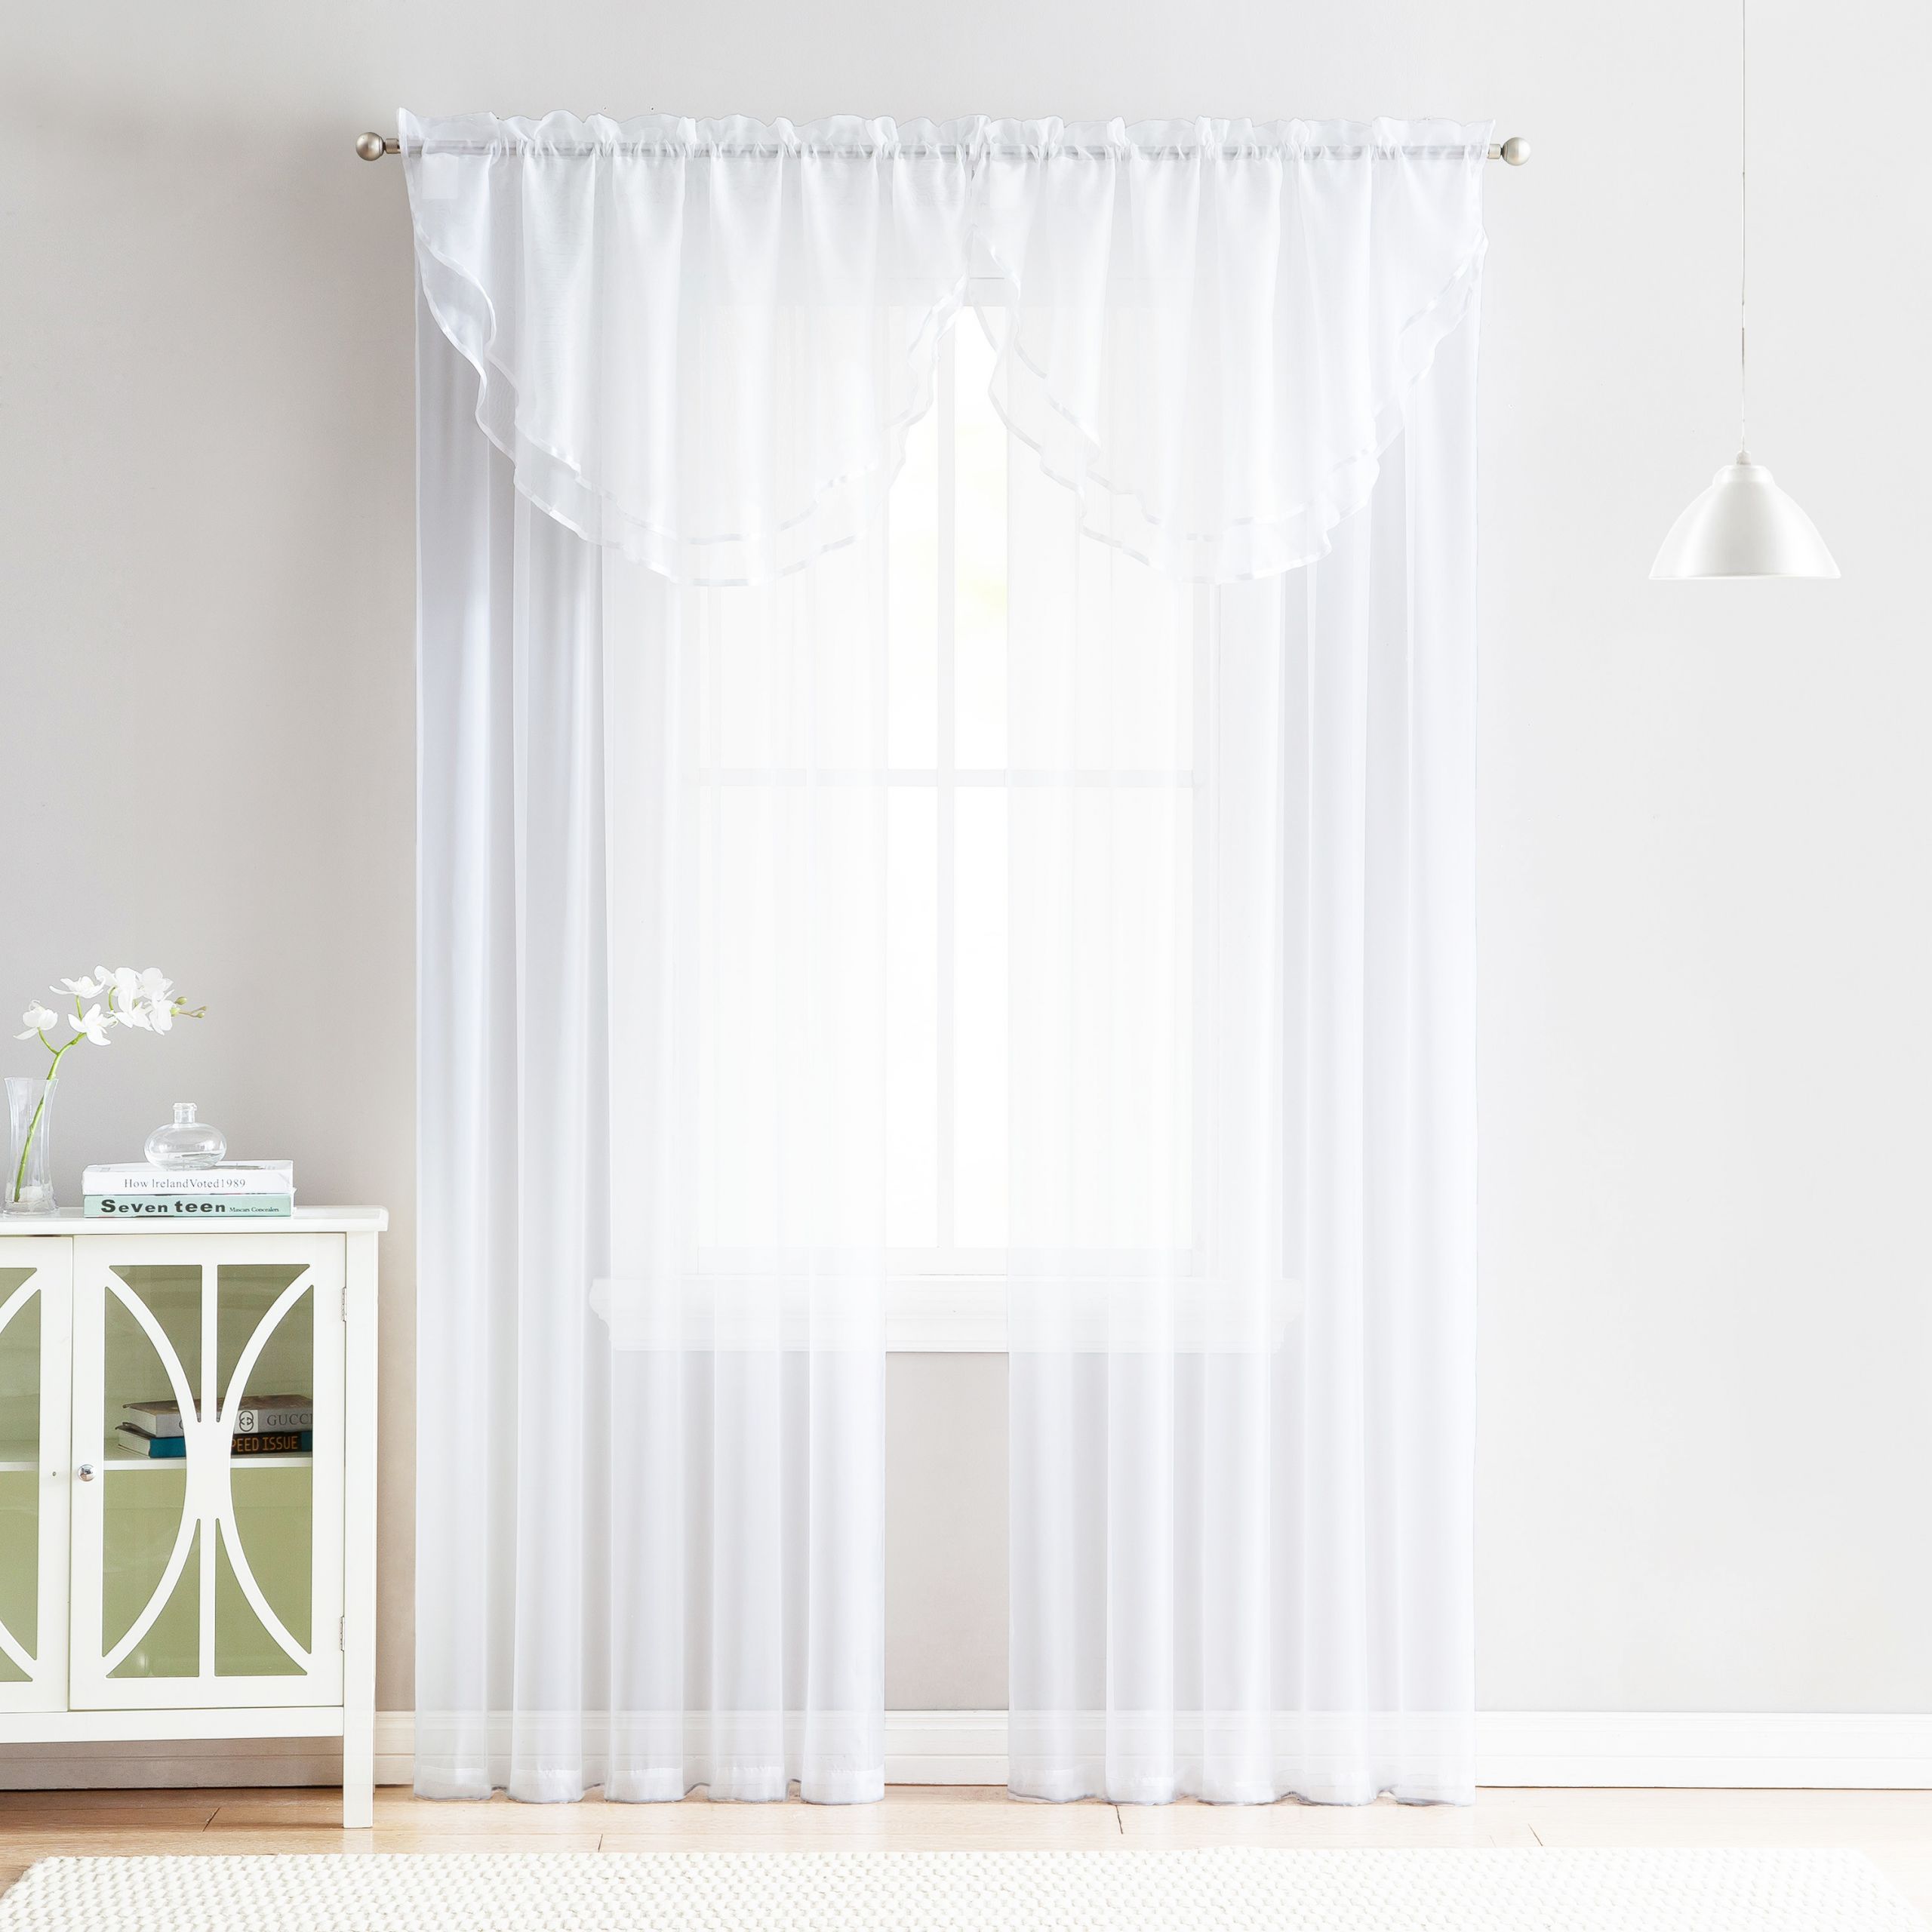 Walmart Living Room Curtains
 4 Piece Sheer Window Curtain Set for Living Room Dining